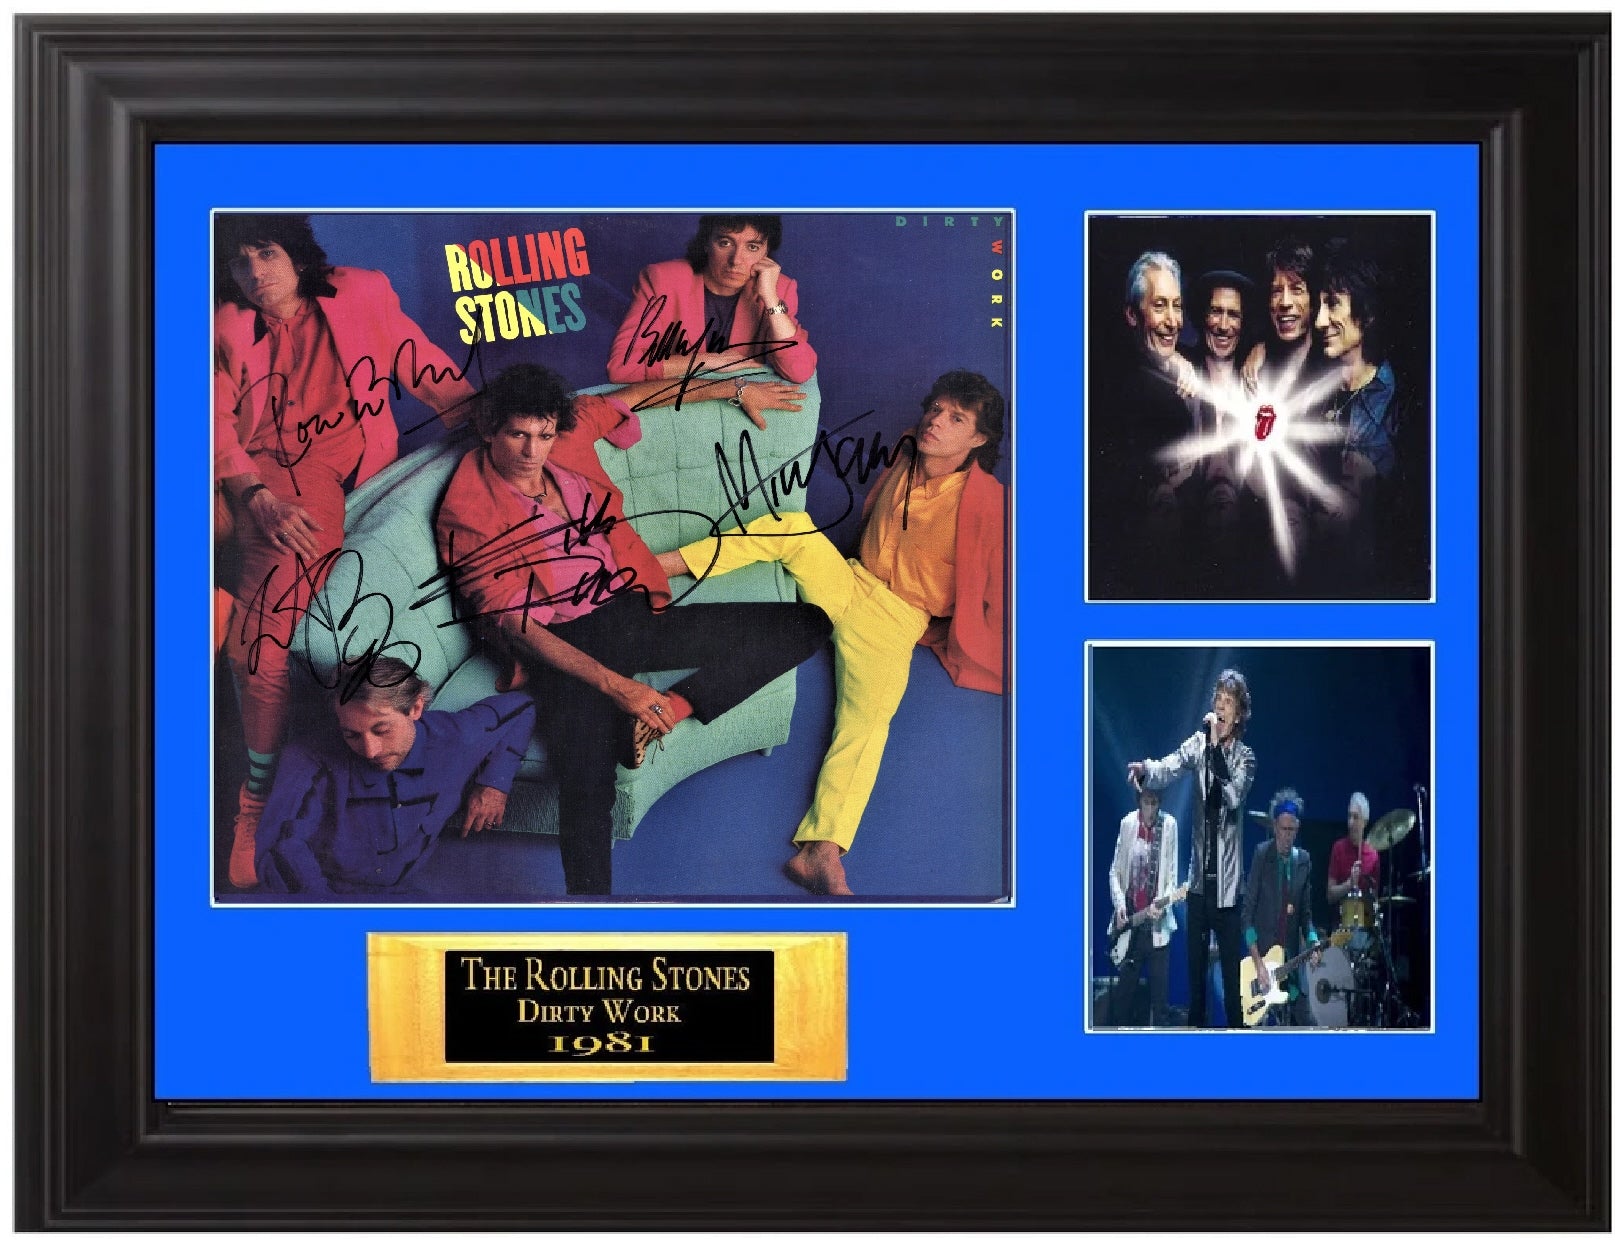 The Rolling Stones Band Signed Dirty Work Album Zion Graphic Collectibles